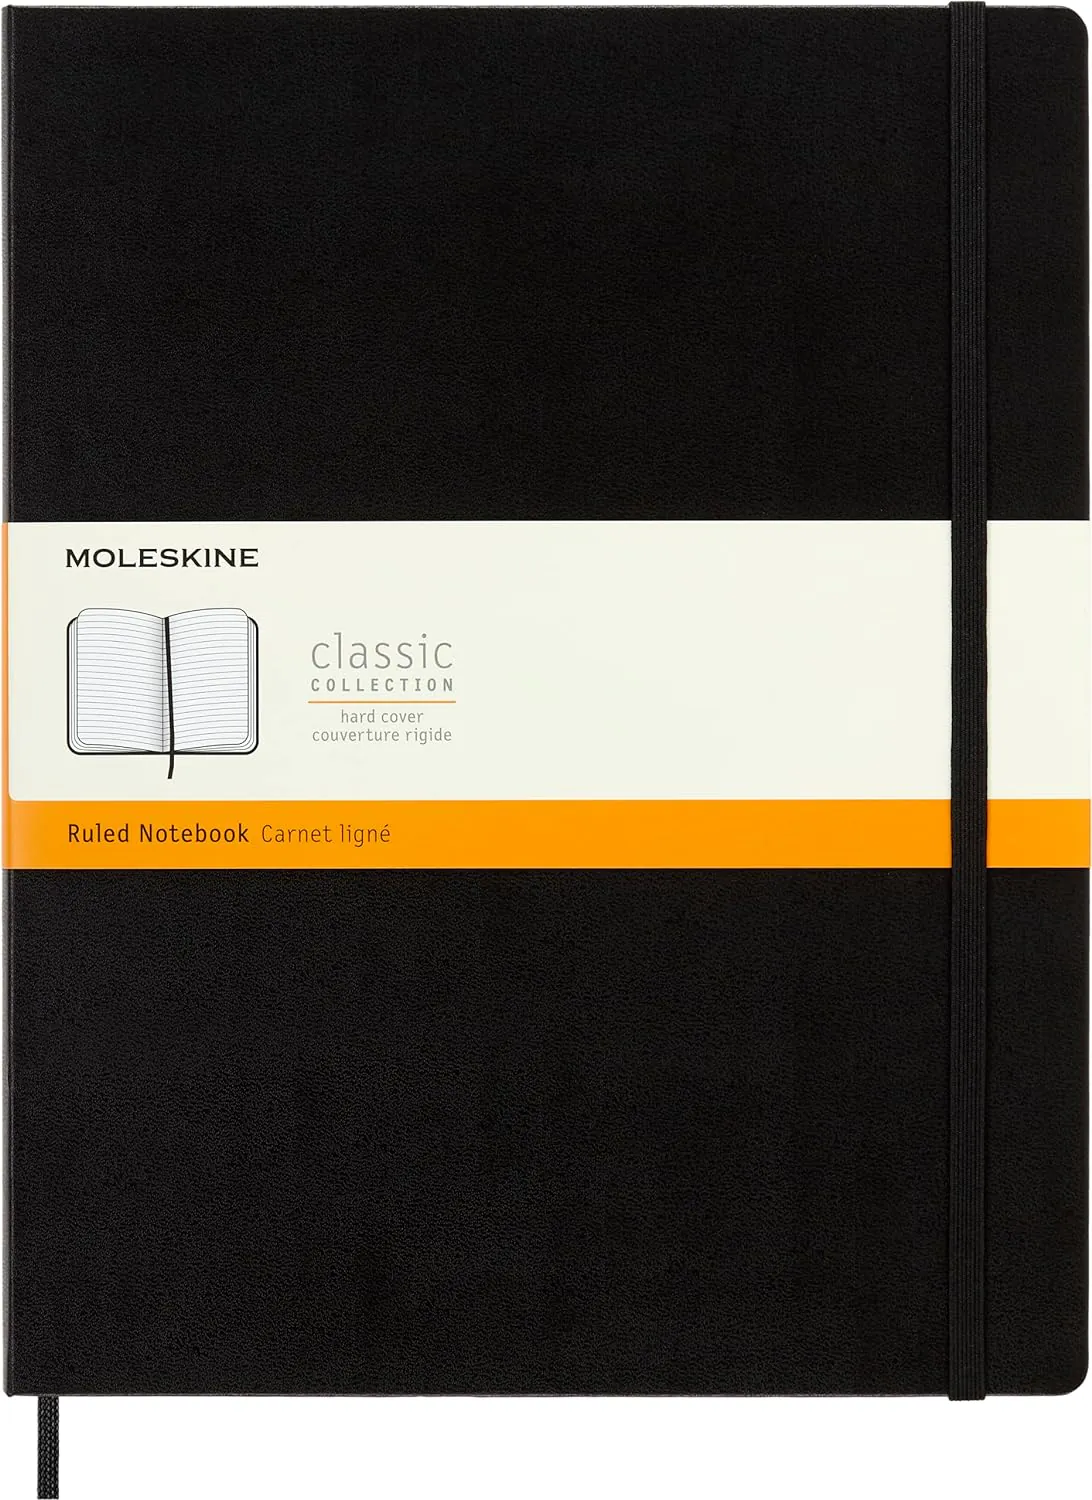 Moleskine Classic Notebook Hard Cover XXL 8 5 x 11 RuledLined Black 192 Pages